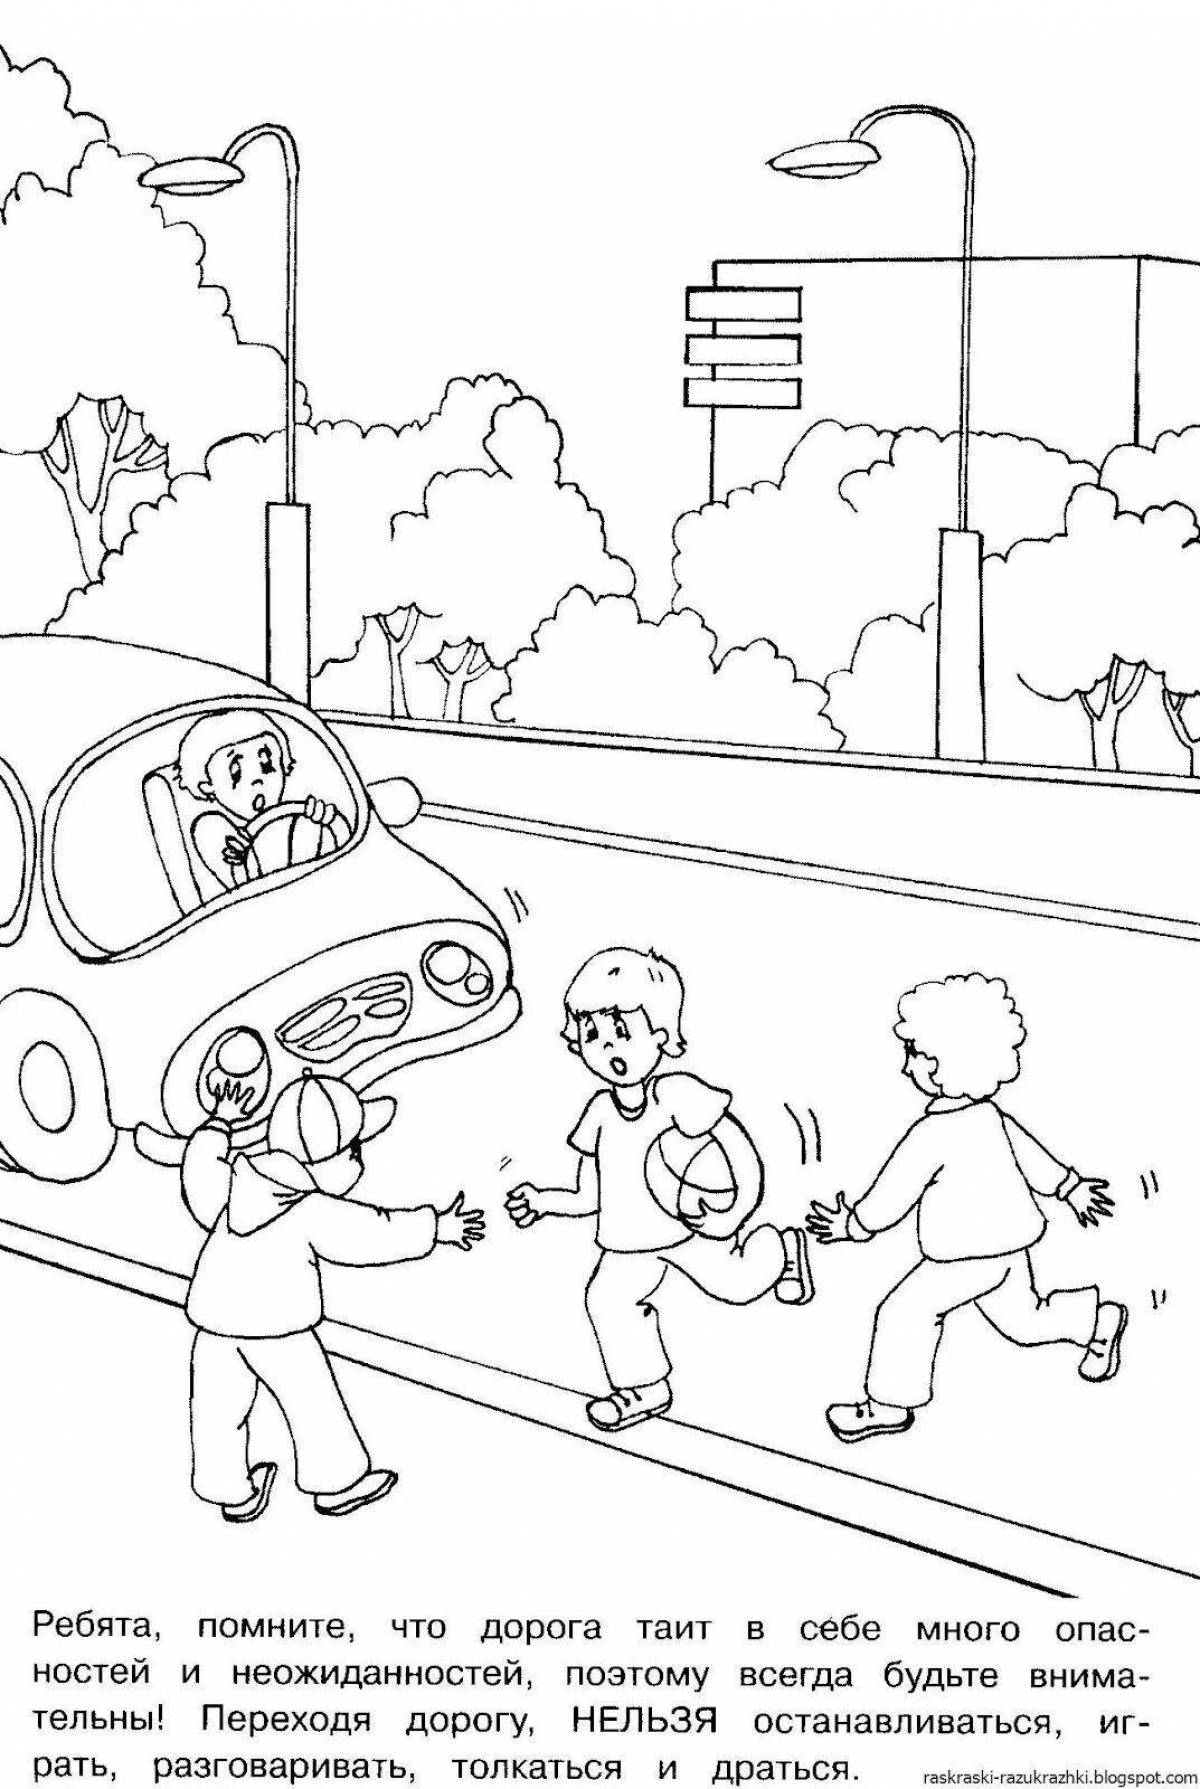 Animated Traffic Controller Coloring Page for Toddlers